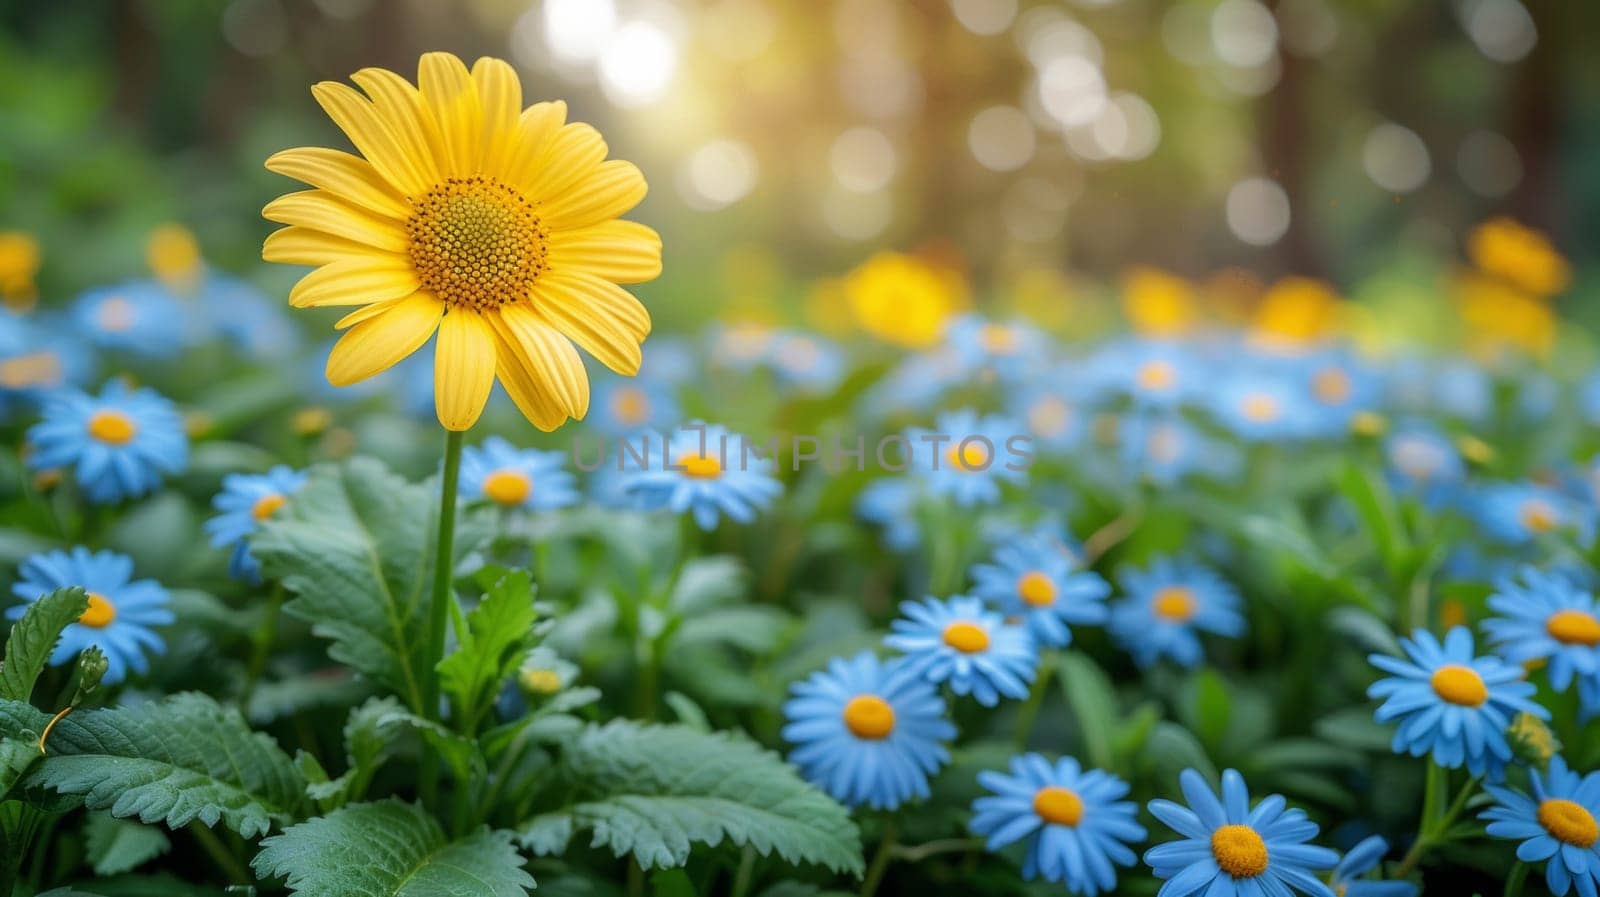 A close up of a yellow flower in the middle of many blue flowers